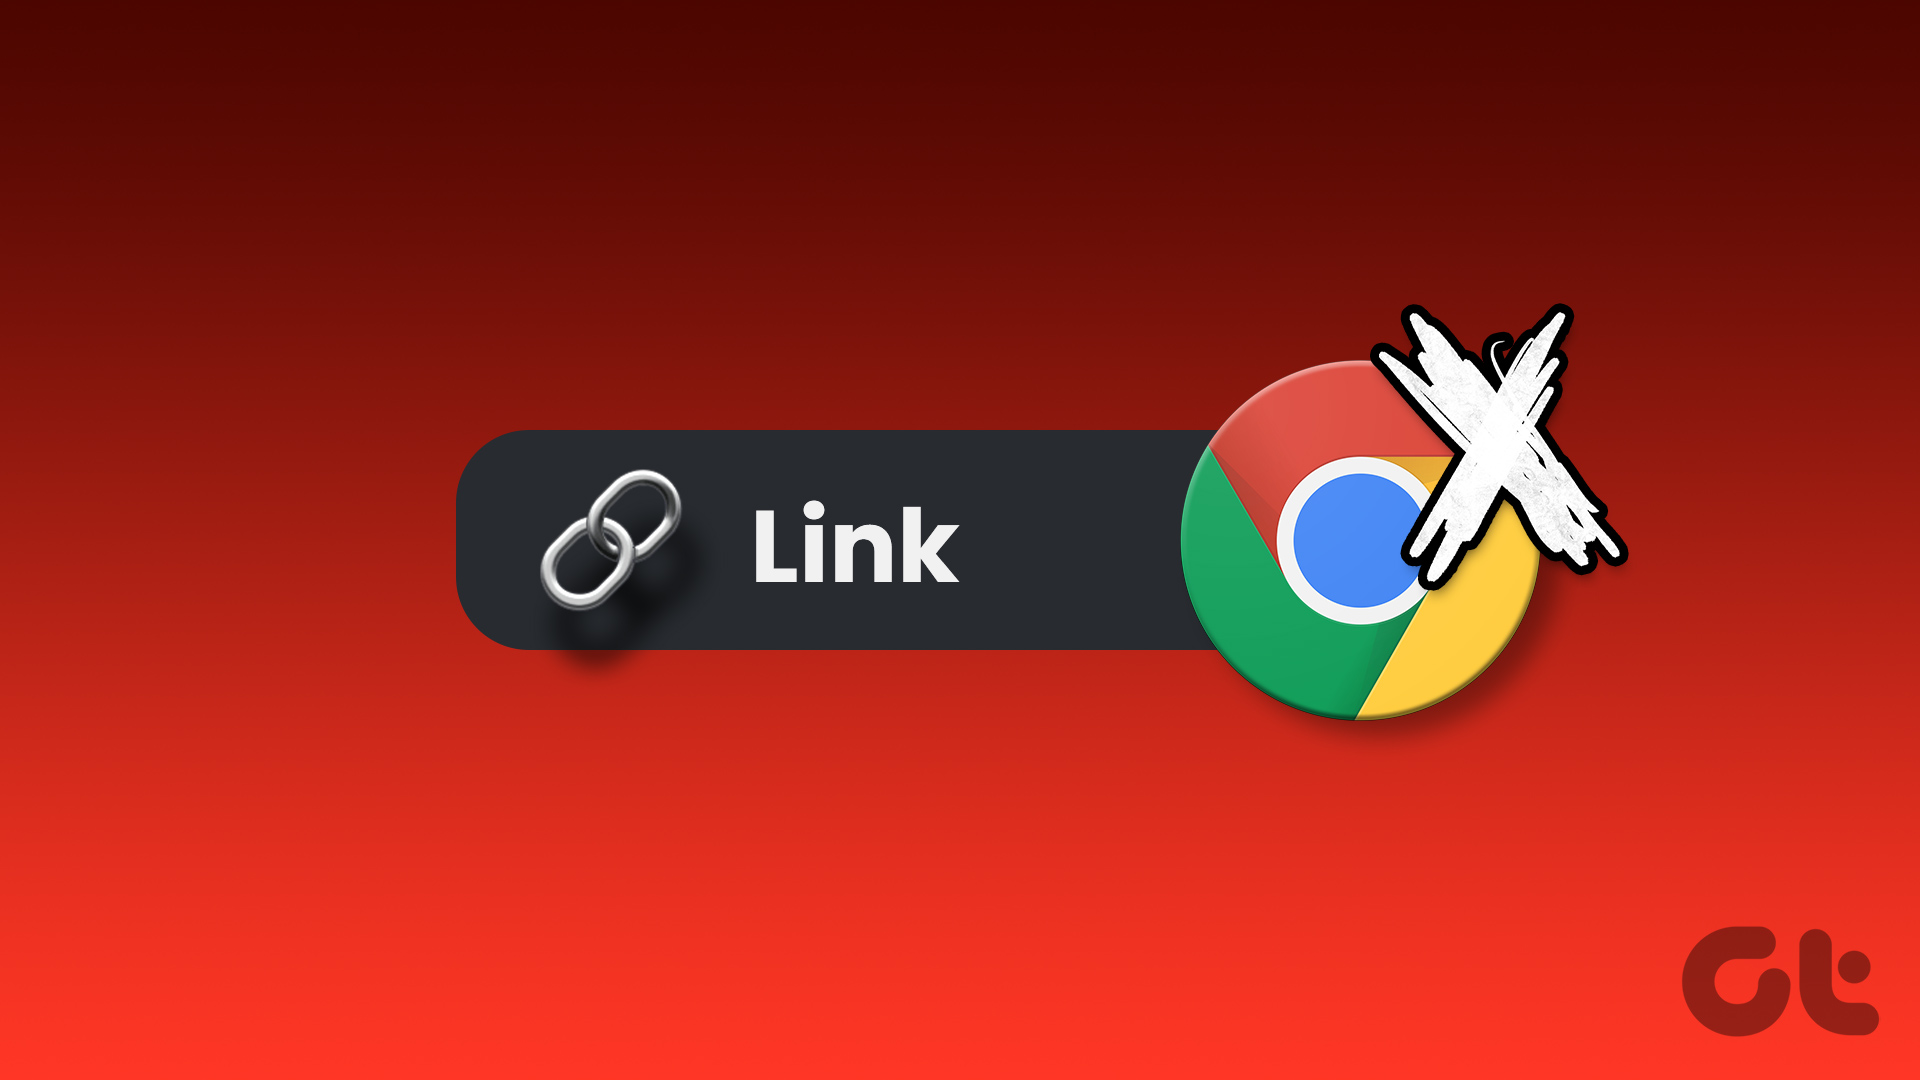 Why links are not opening in Google?